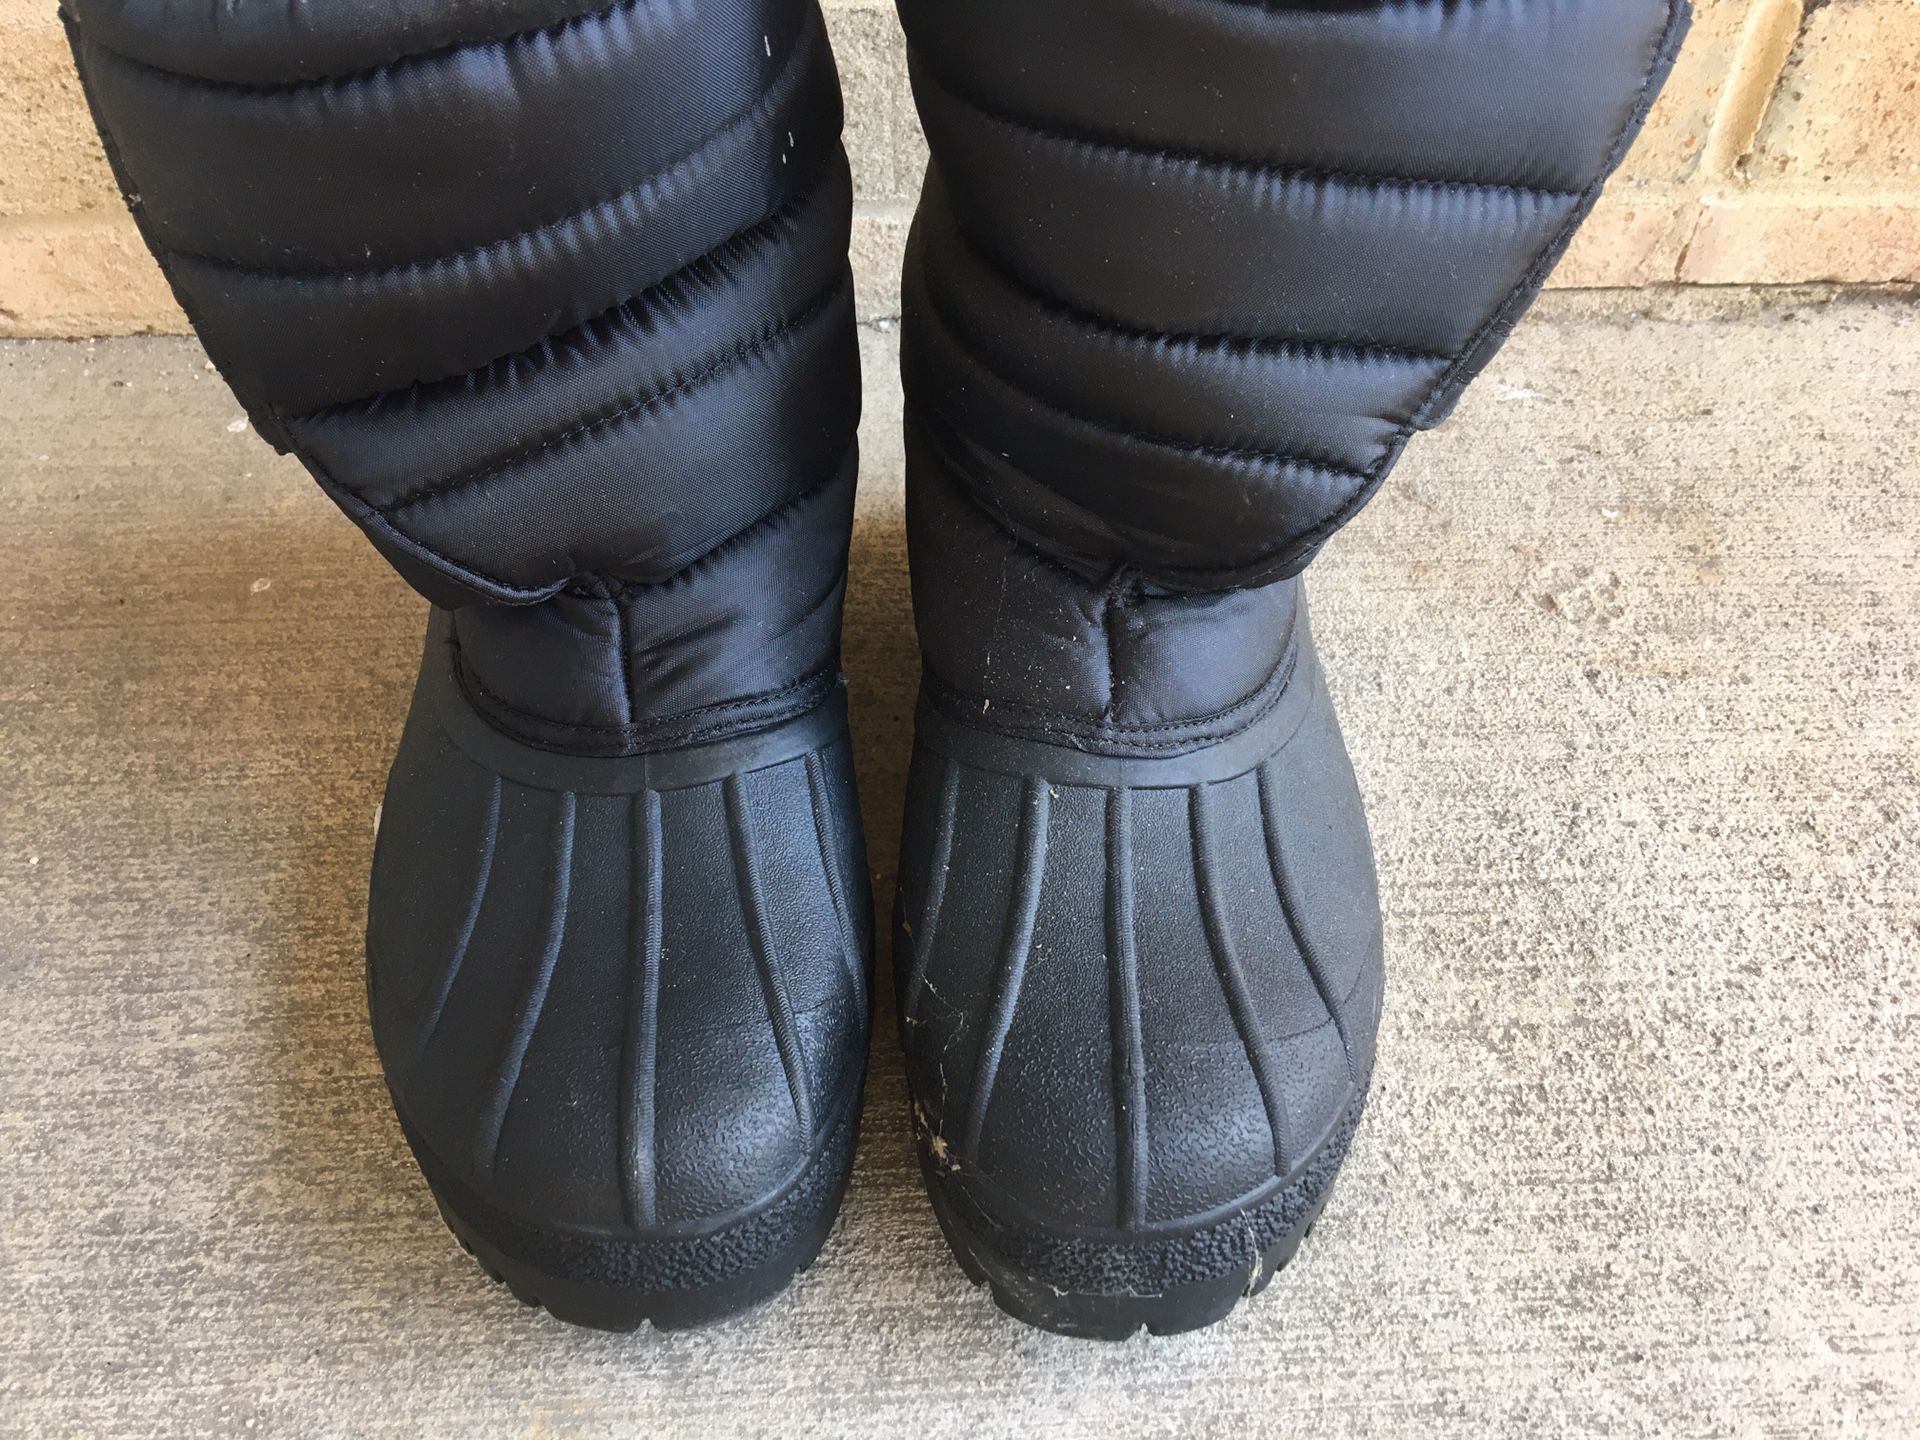 Snow boots US size 8, EU 41.5 black (fits Up To US 9)